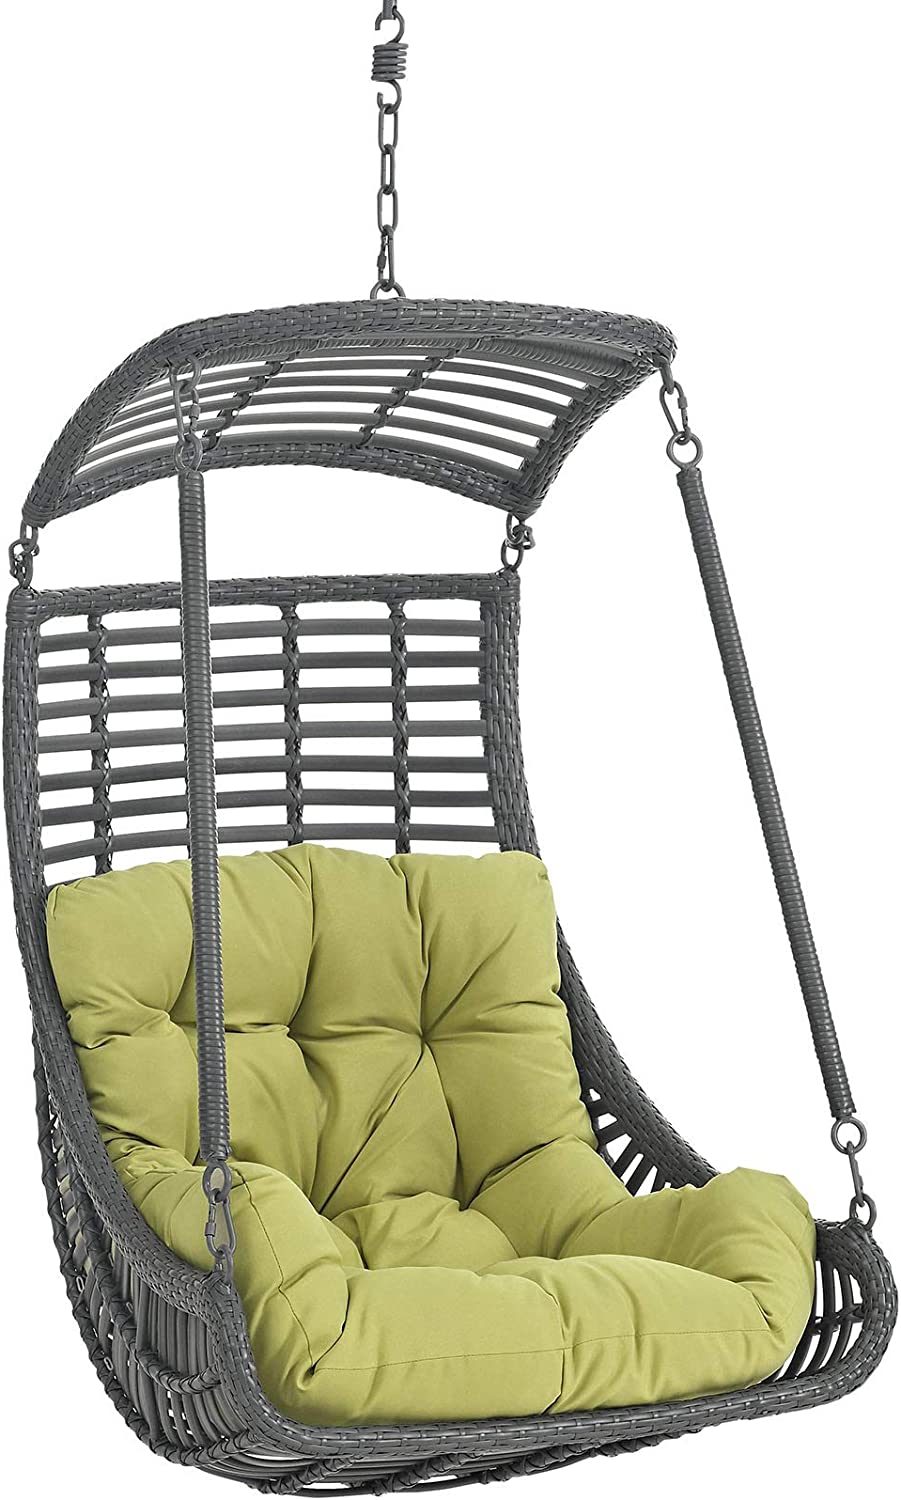 Modway EEI-2655-PER-SET Jungle Outdoor Patio Balcony Porch Lounge Swing Chair Set with Hanging Steel Chain Peridot